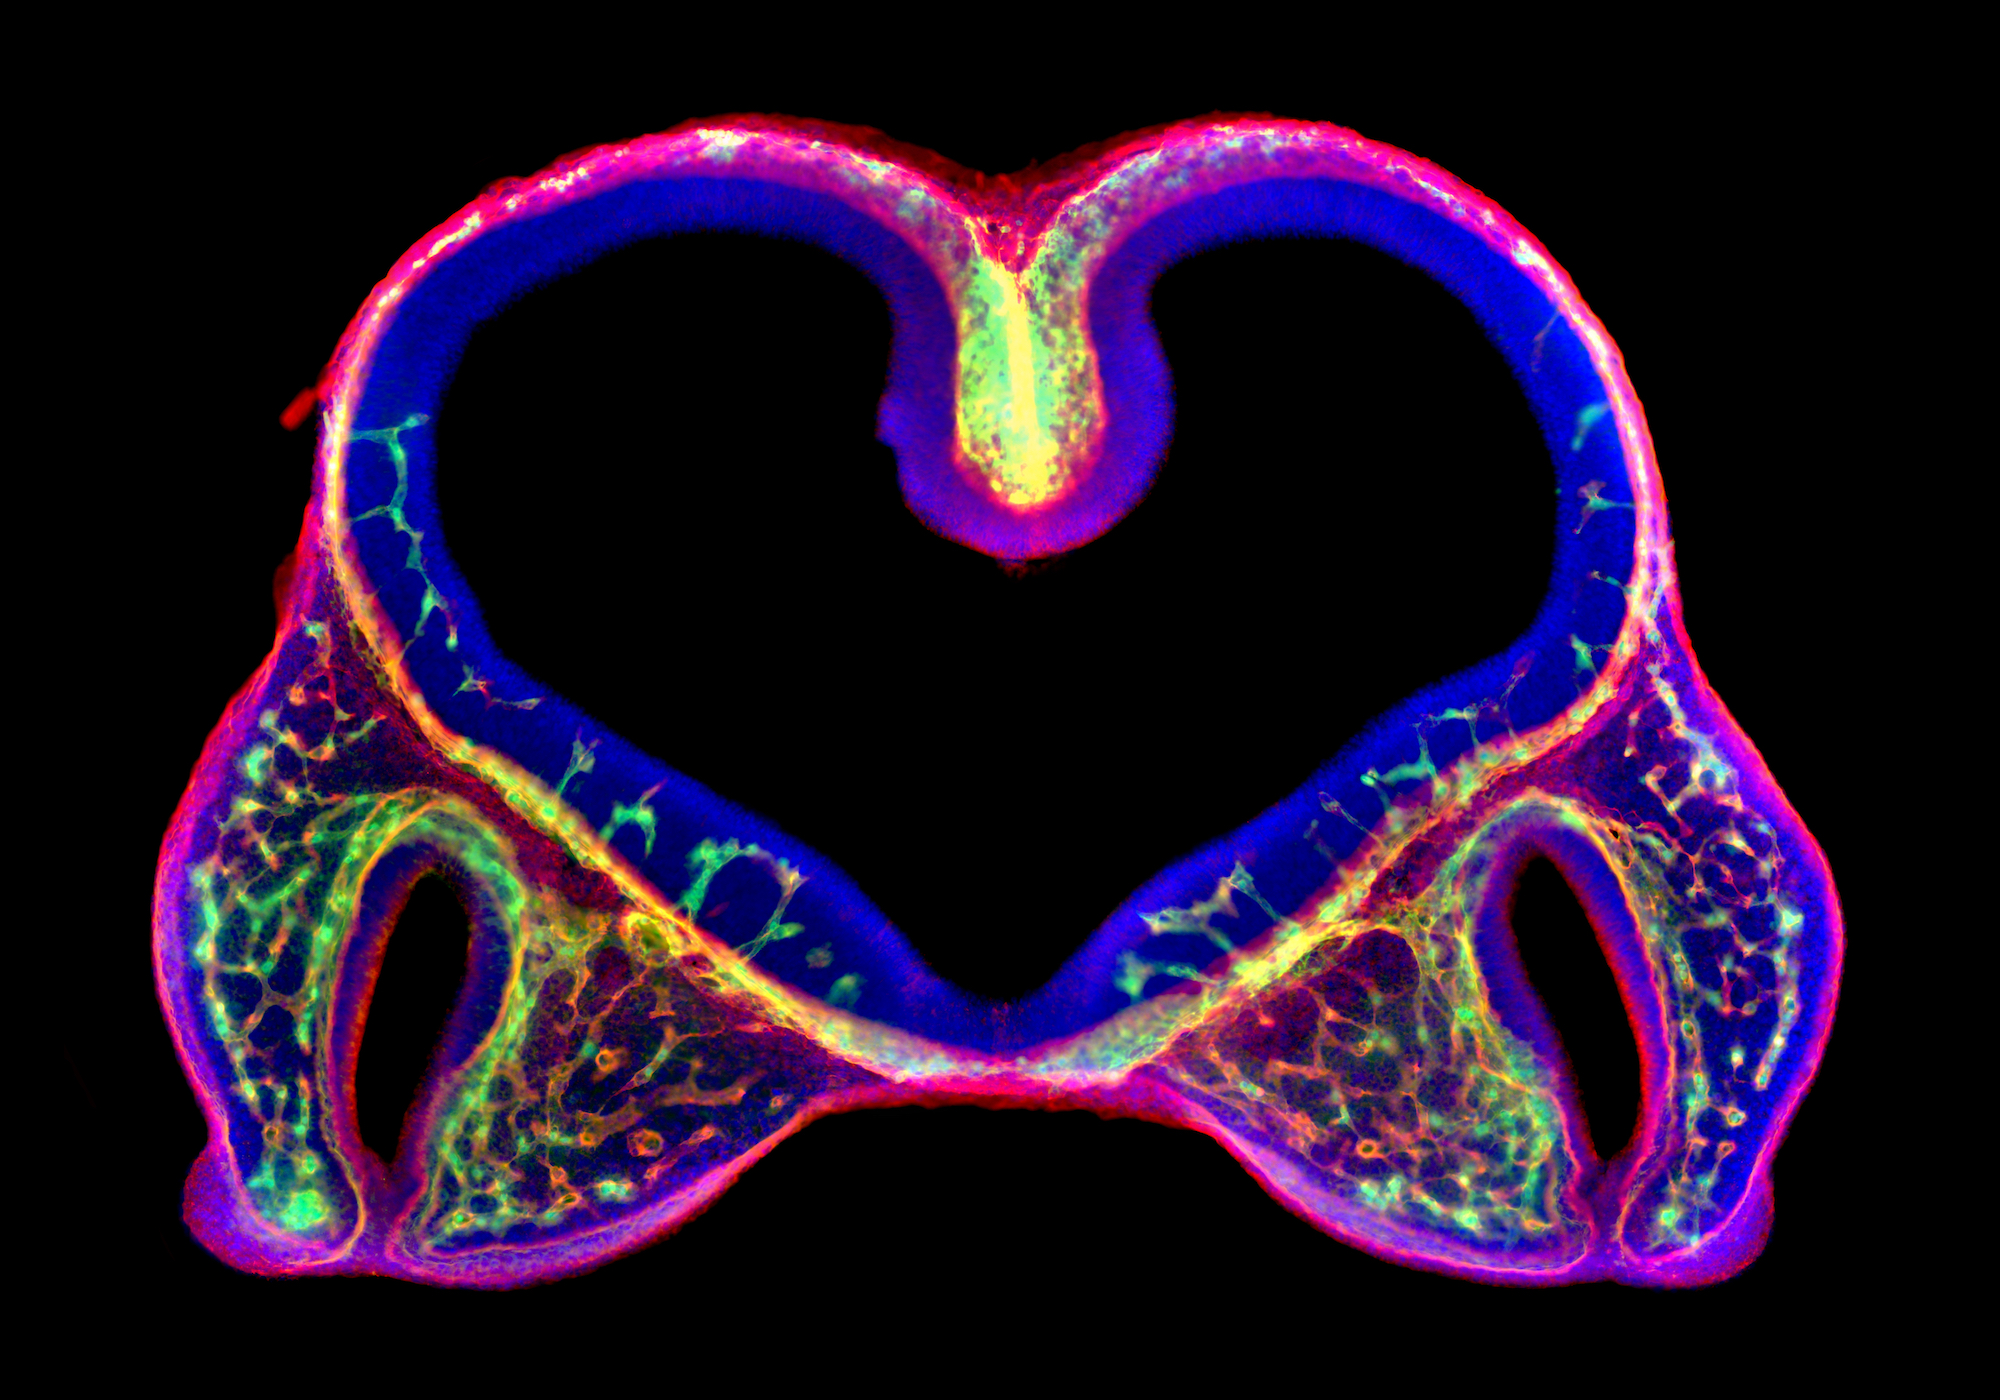 Microscopic image of a section of the head of a mouse embryo, showing blood vessels highlighted in bright fluorescent colors, including one shaped like a heart.